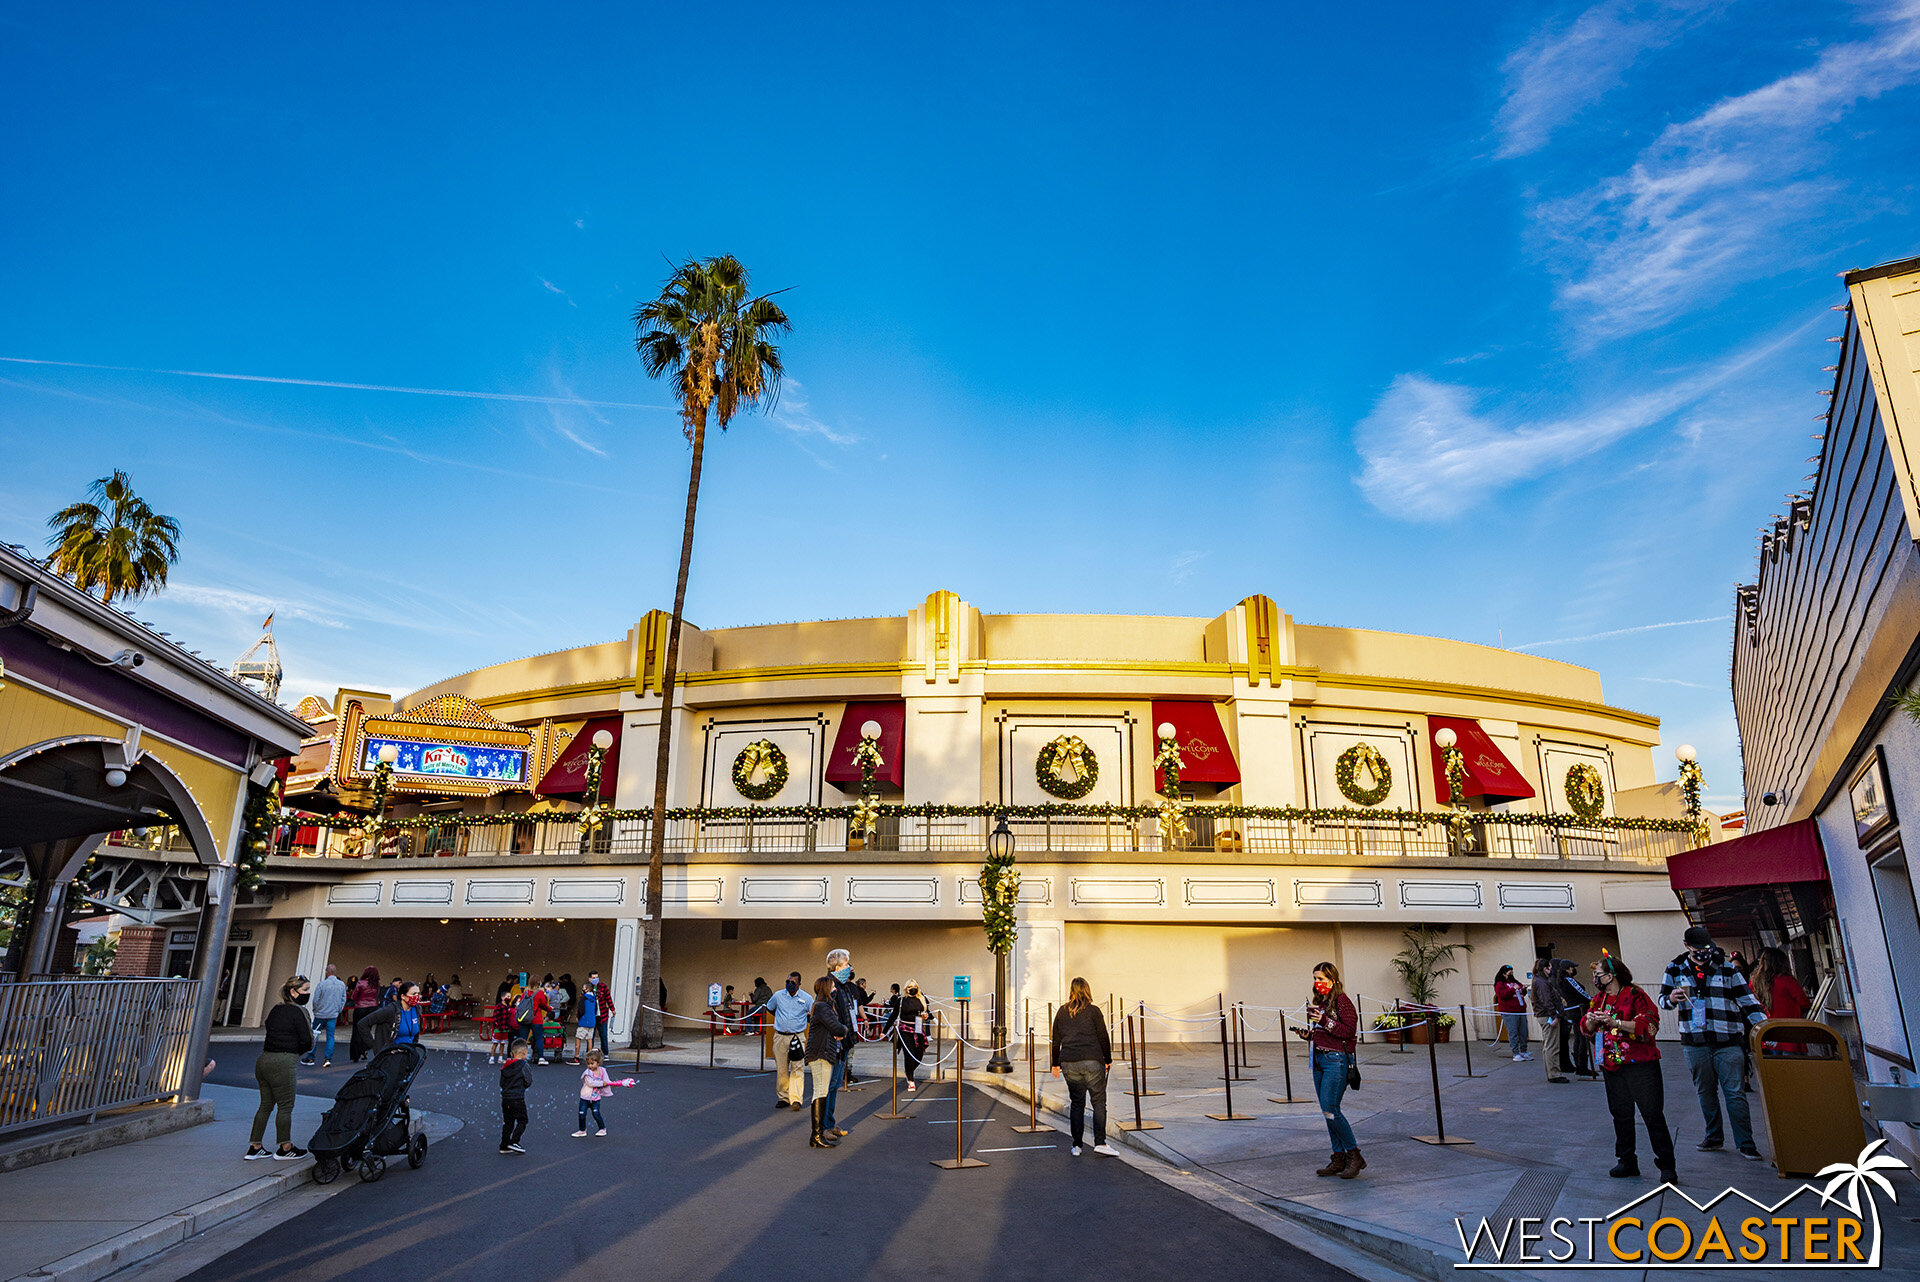  Art deco motifs have been installed along the theater exterior. 